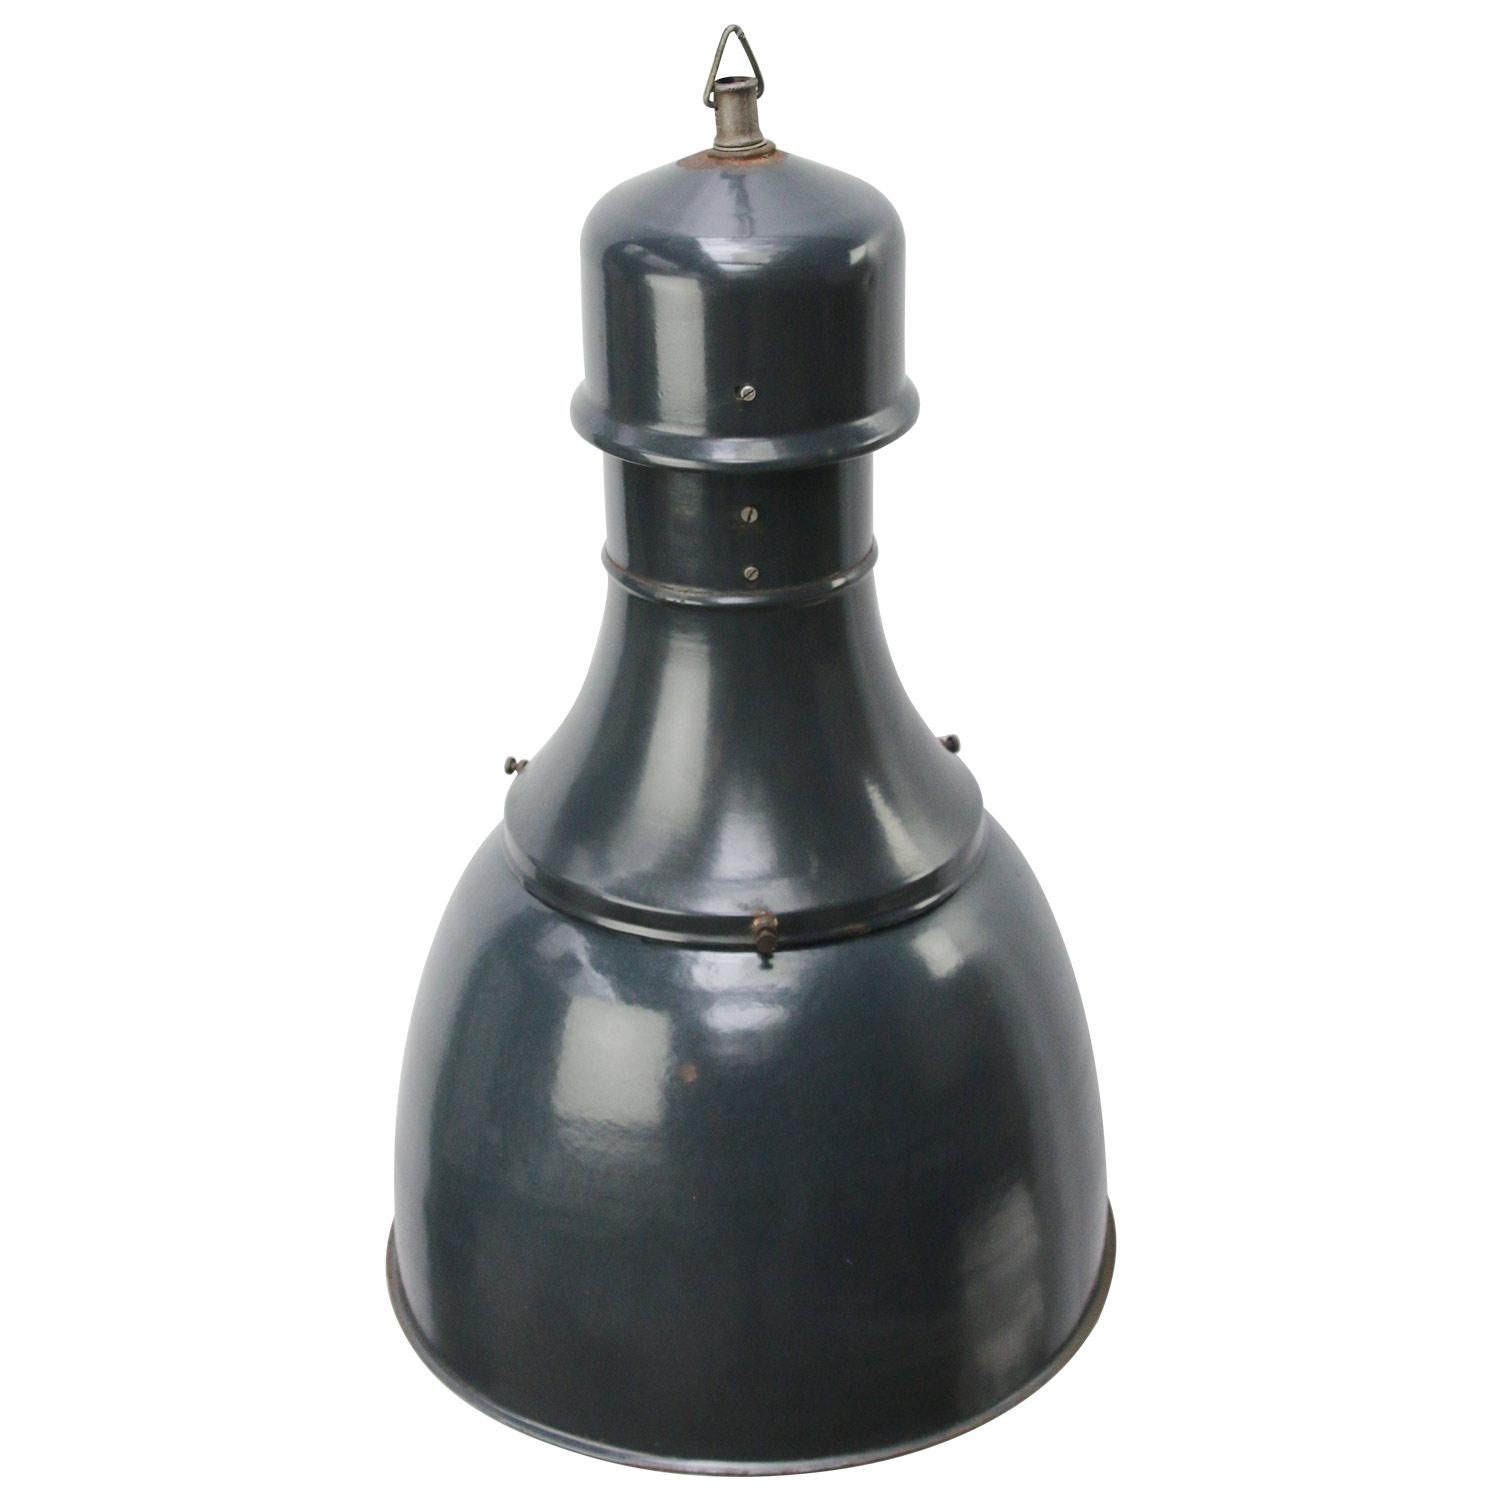 Factory light, dark blue enamel. White interior cast iron top.

Weight: 4.9 kg / 10.8 lb

Priced per individual item. All lamps have been made suitable by international standards for incandescent light bulbs, energy-efficient and LED bulbs.